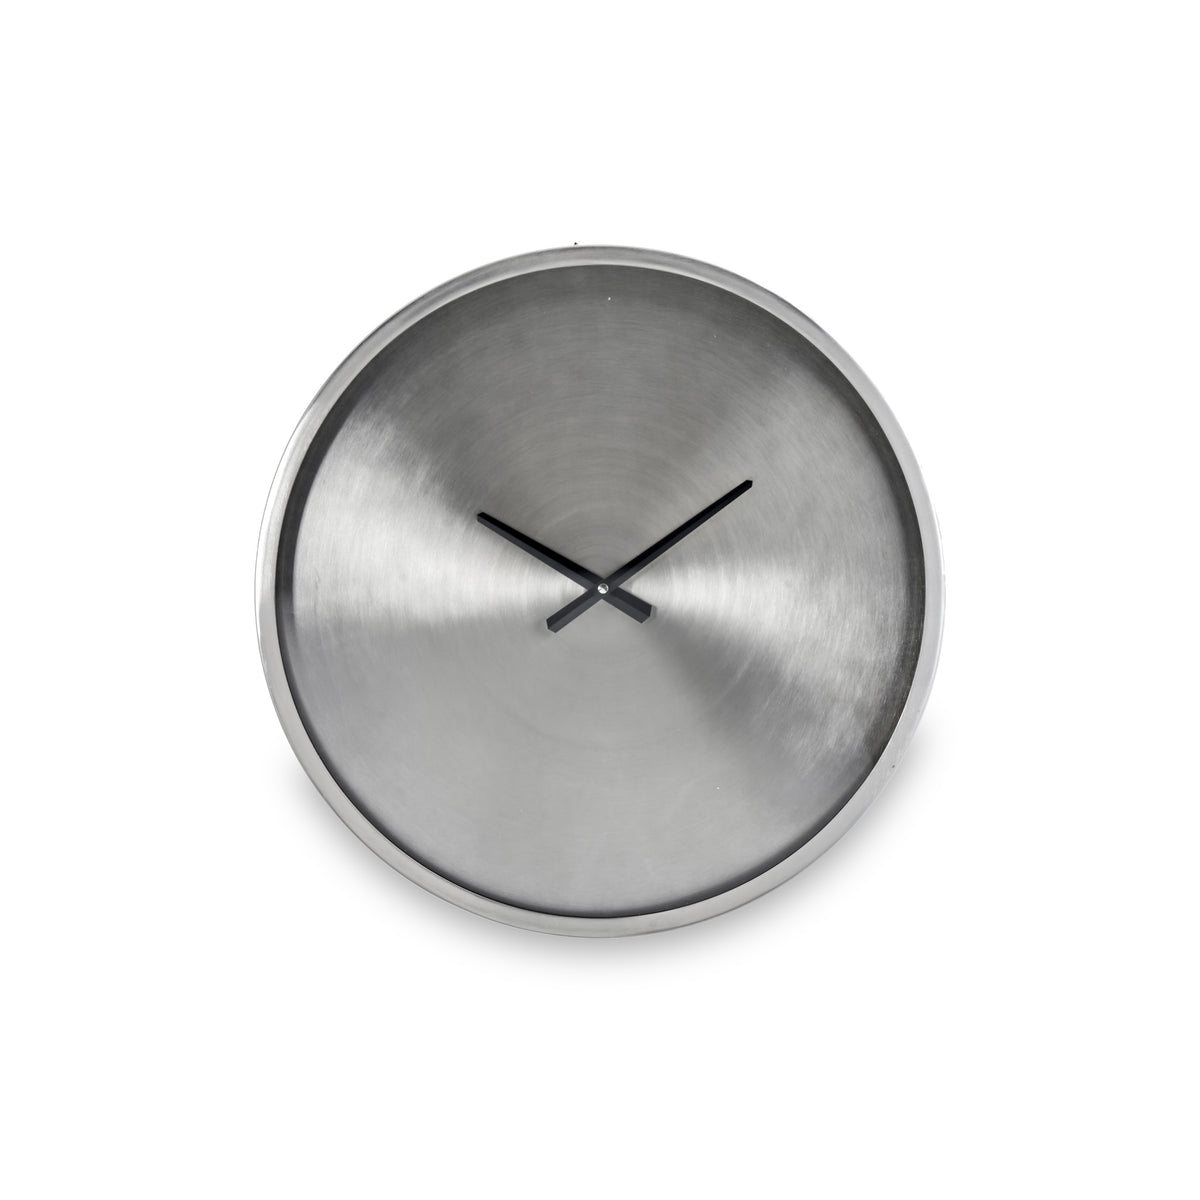 Brushed Nickel Round Wall Clock from Roseland Furniture